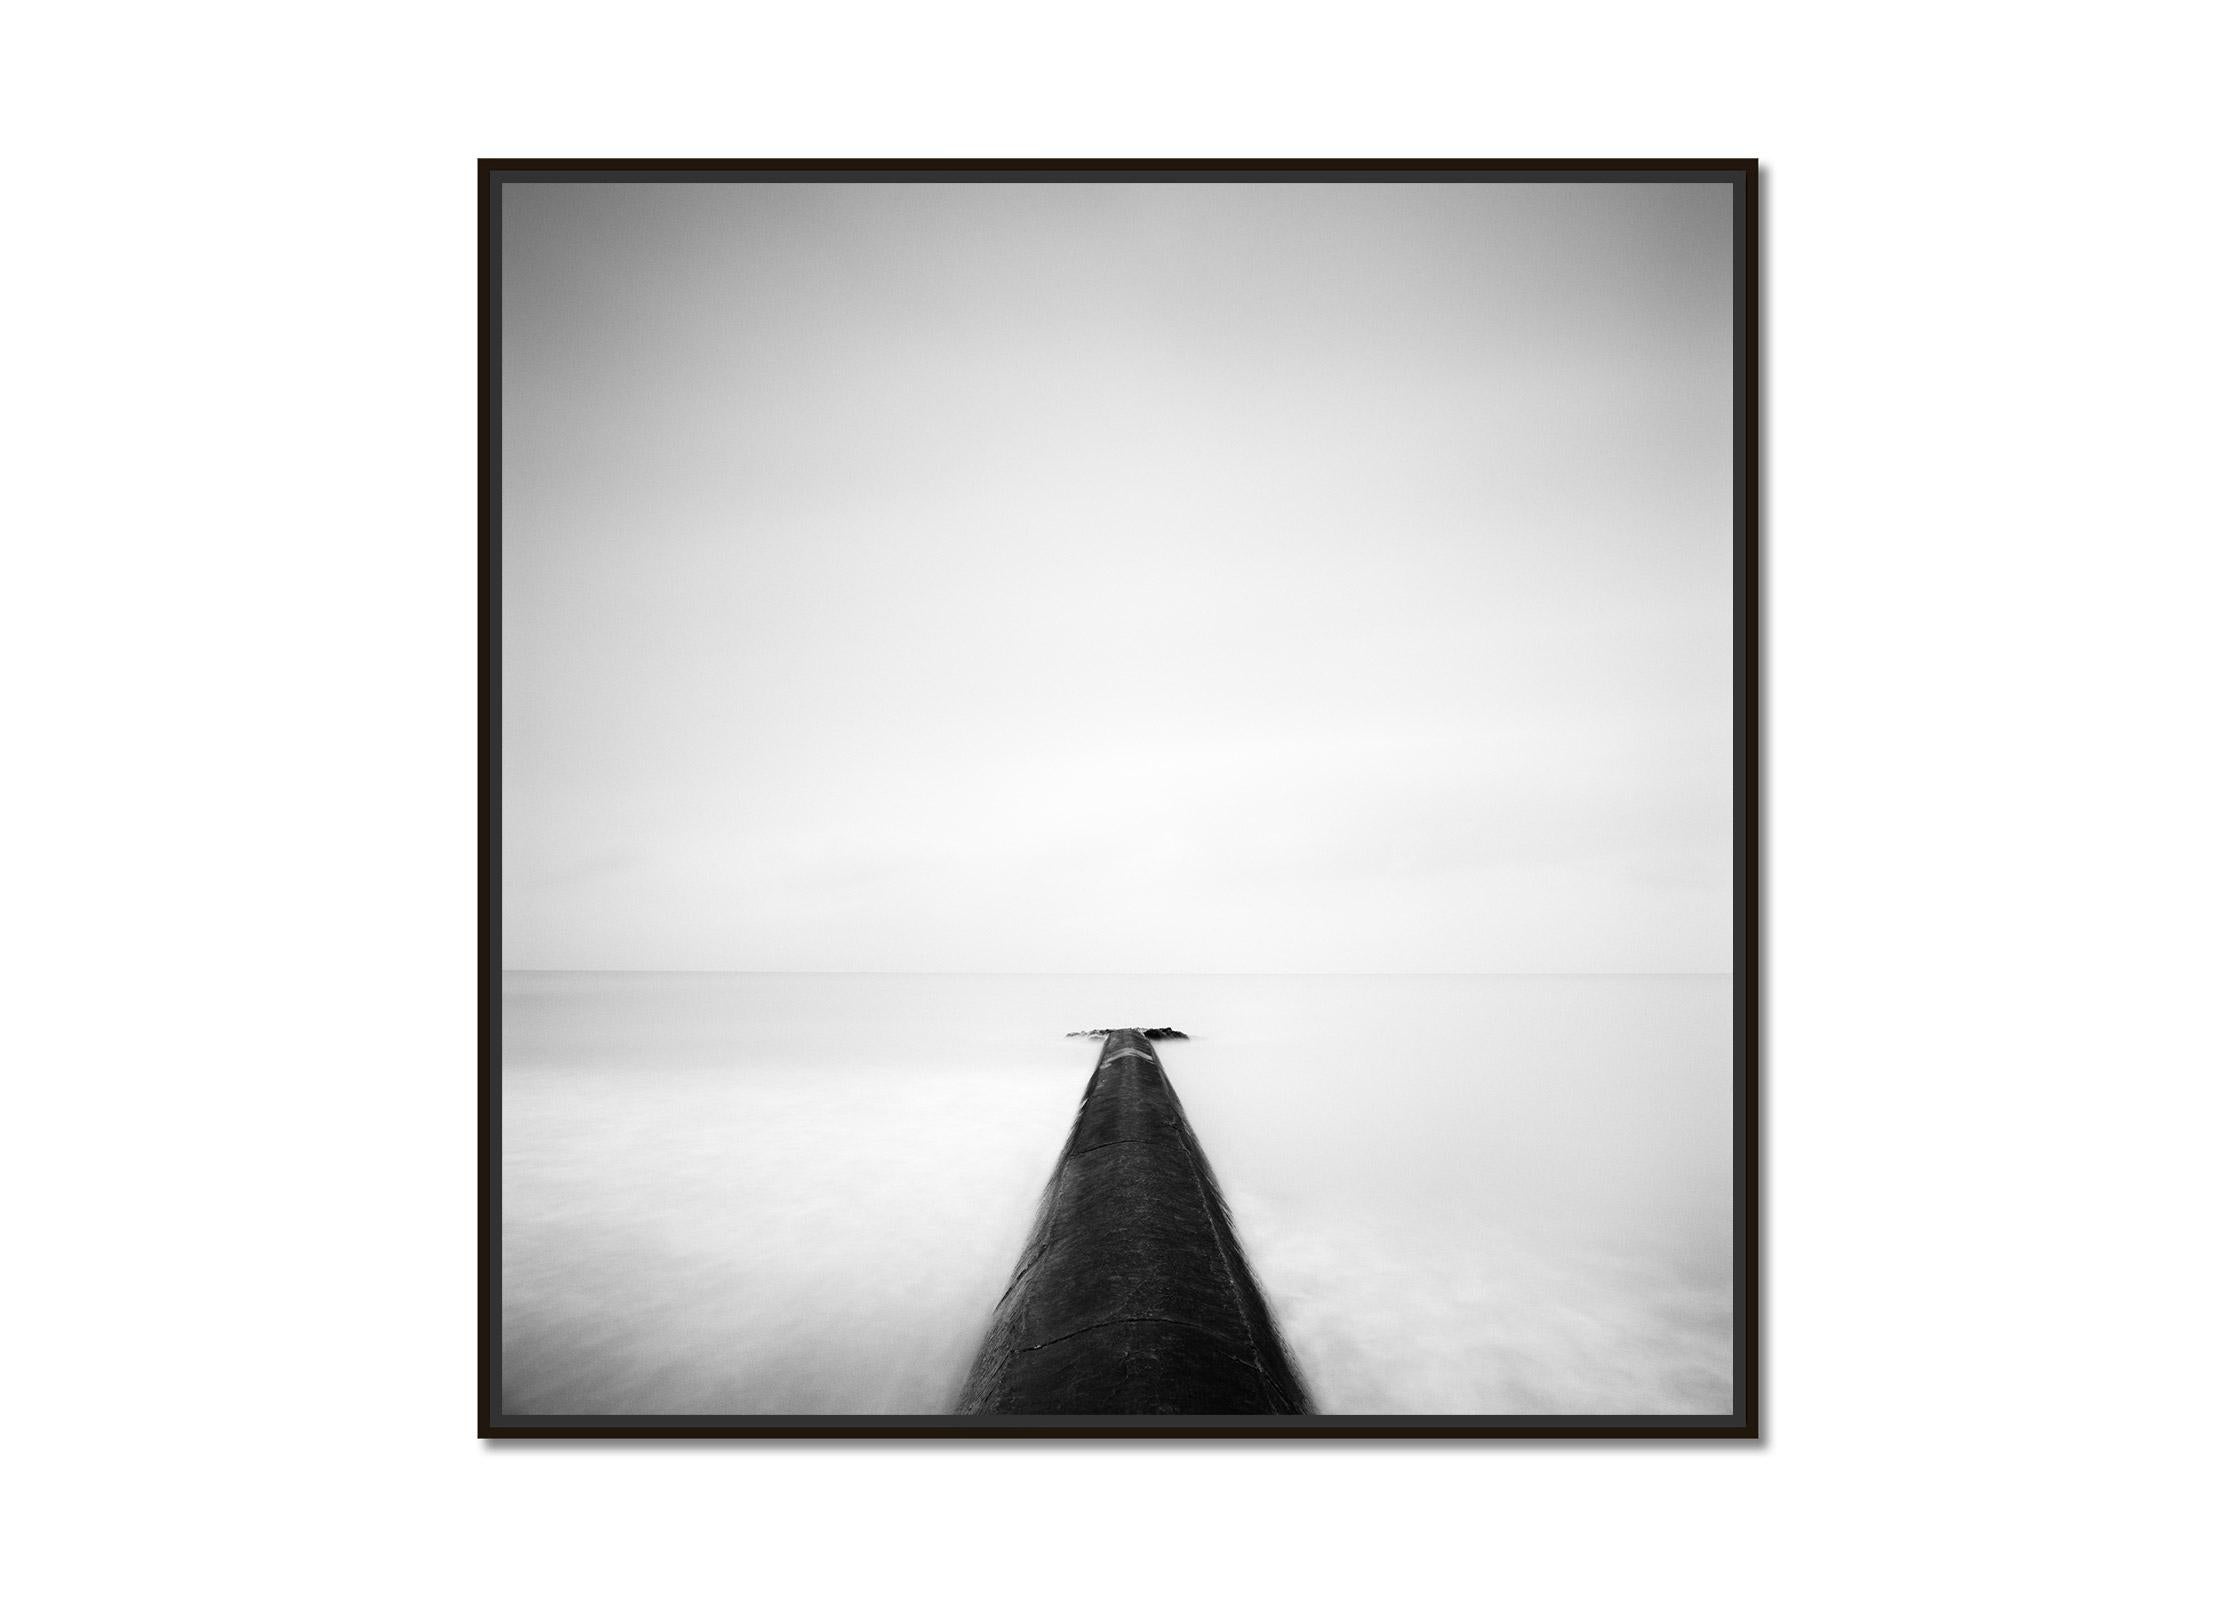 Straight on, Pier, Ozean, Normandie, France, black white photography, landscape - Photograph by Gerald Berghammer